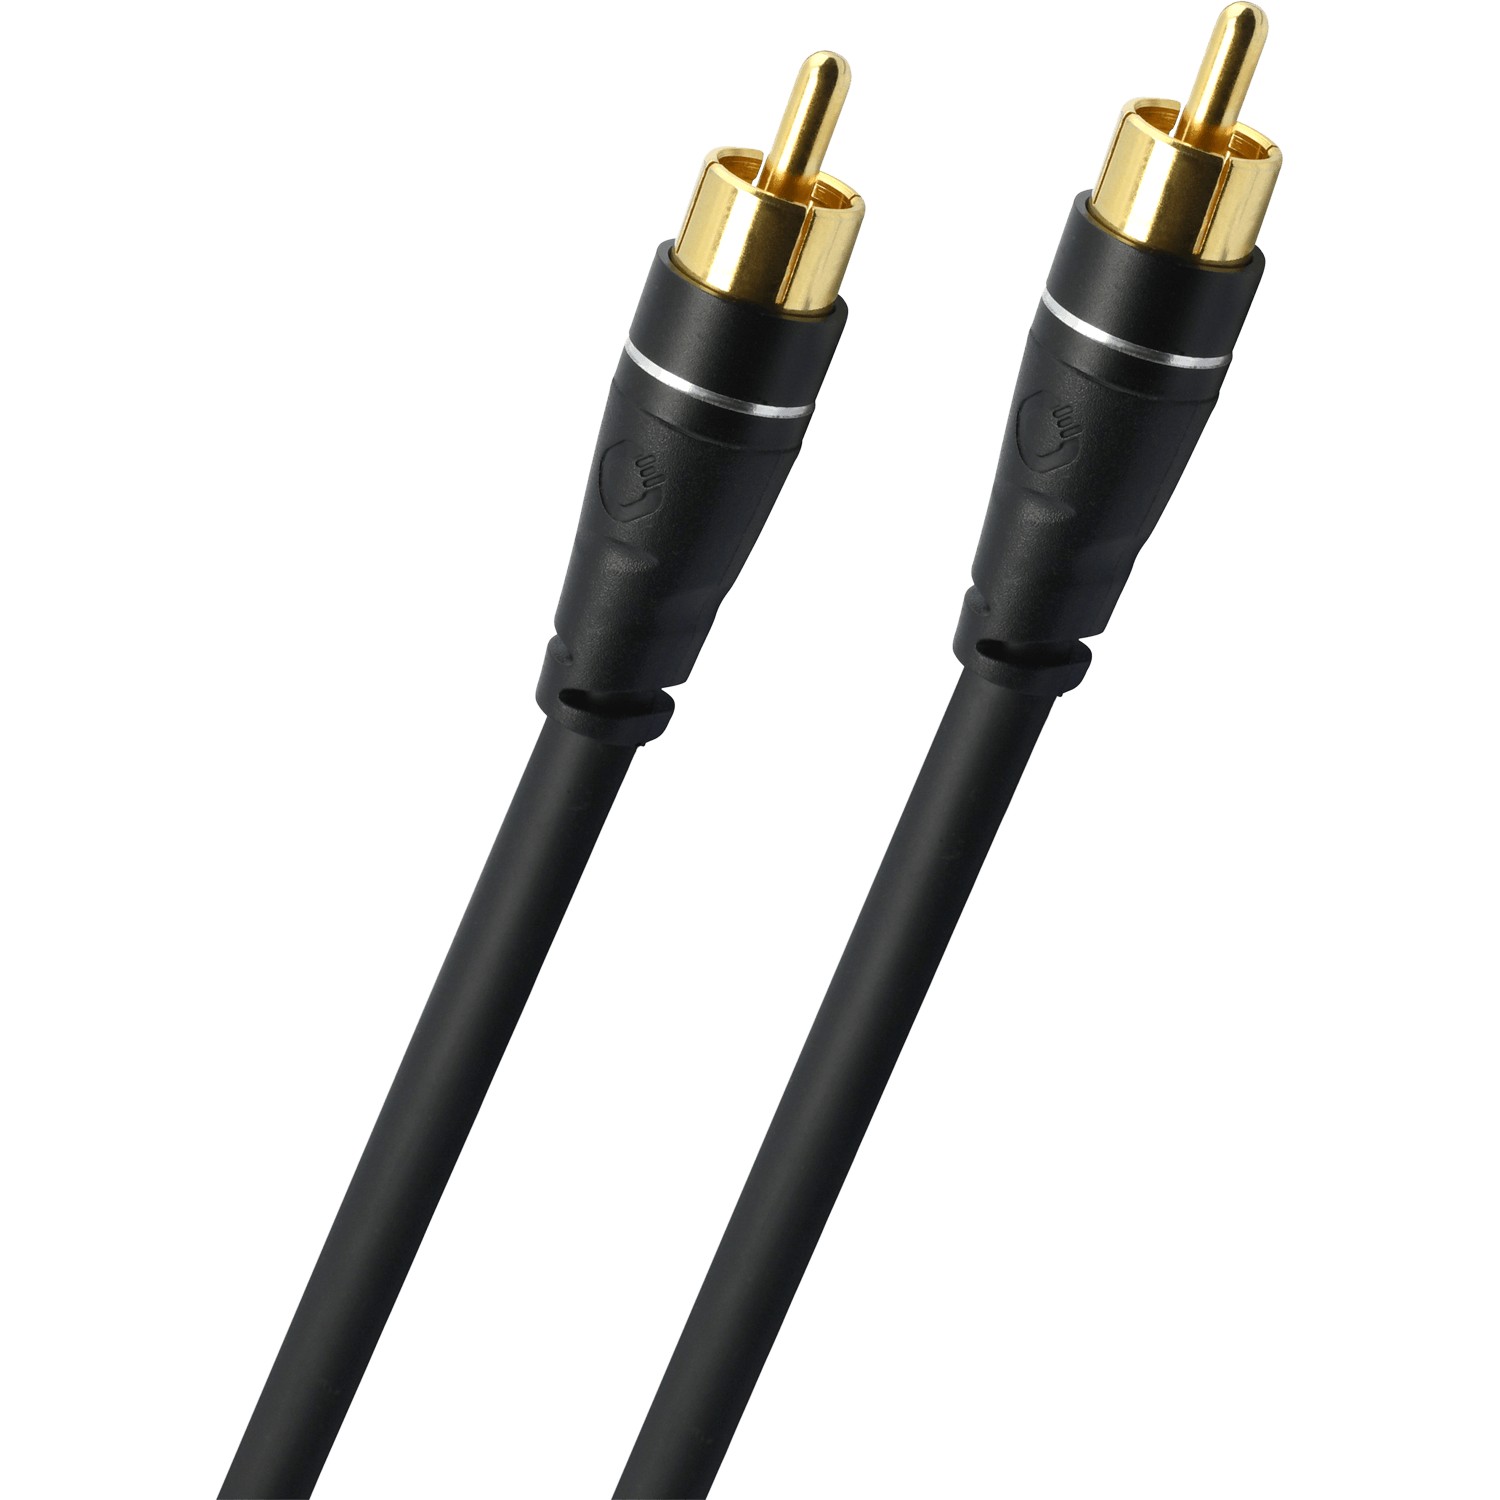 Кабели межблочные аудио Oehlbach EXCELLENCE Sub Link Subwoofer cable 10m bw, D1C33164 кабели межблочные аудио qed performance headphone ext cable 6 35mm 1 5m